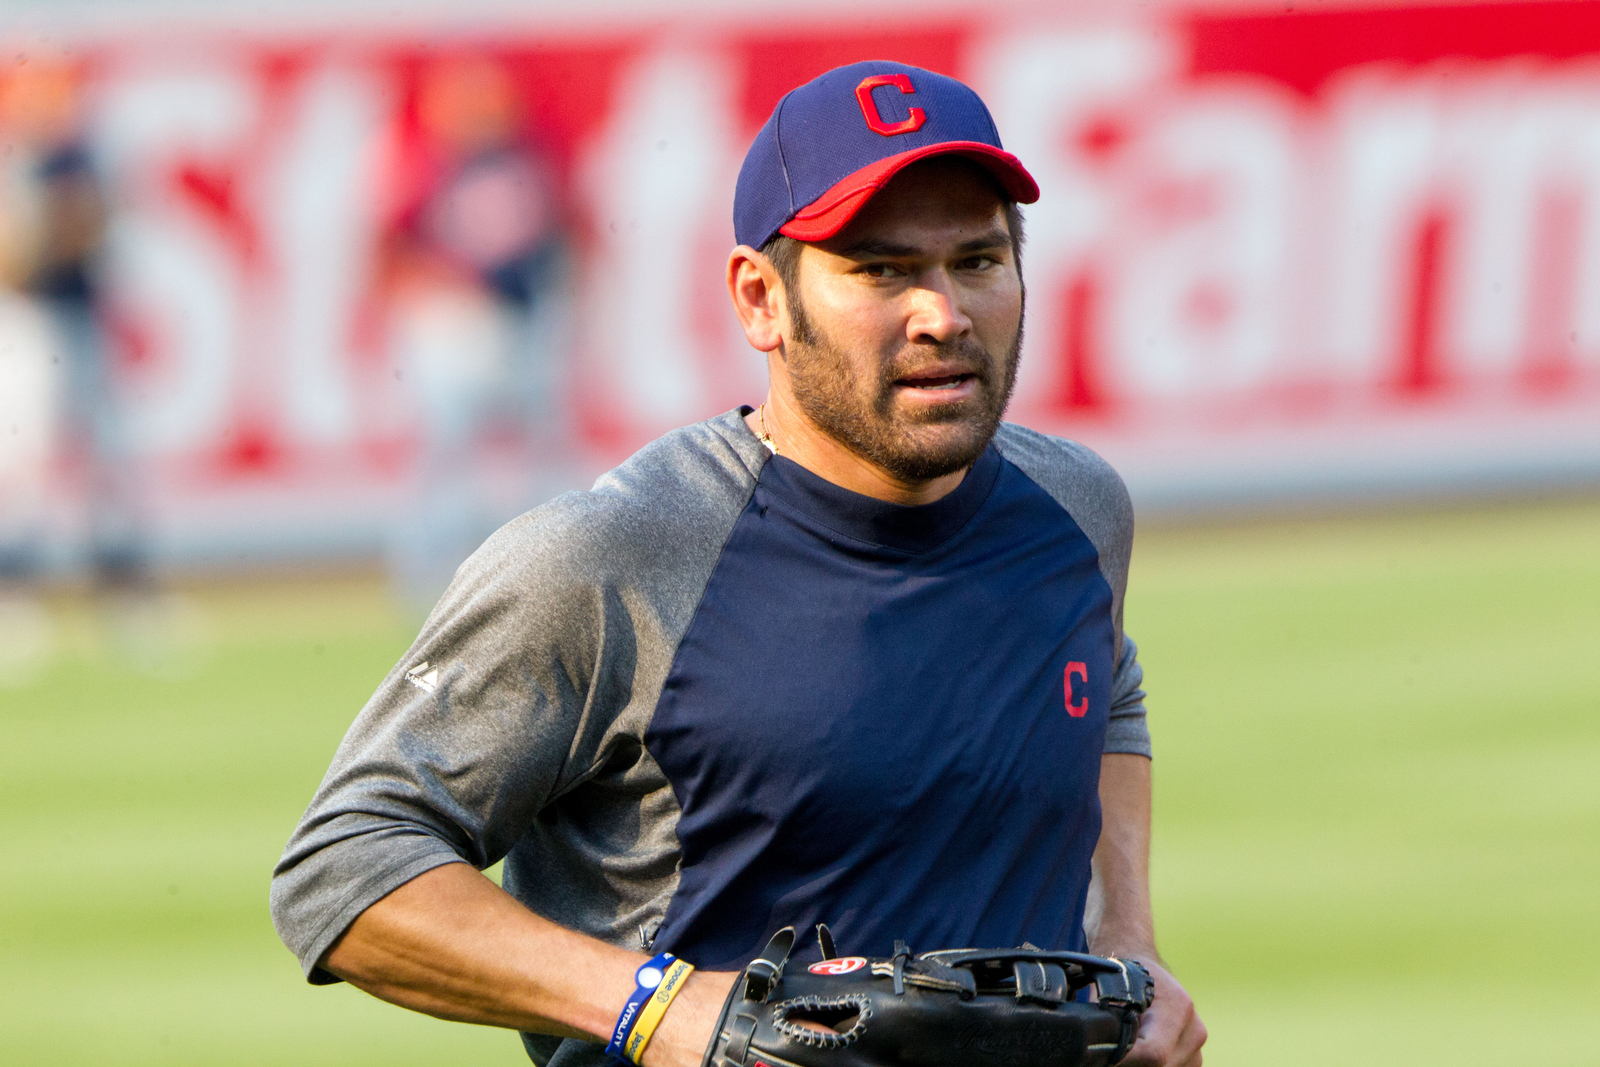 Johnny Damon still willing to play at major league level